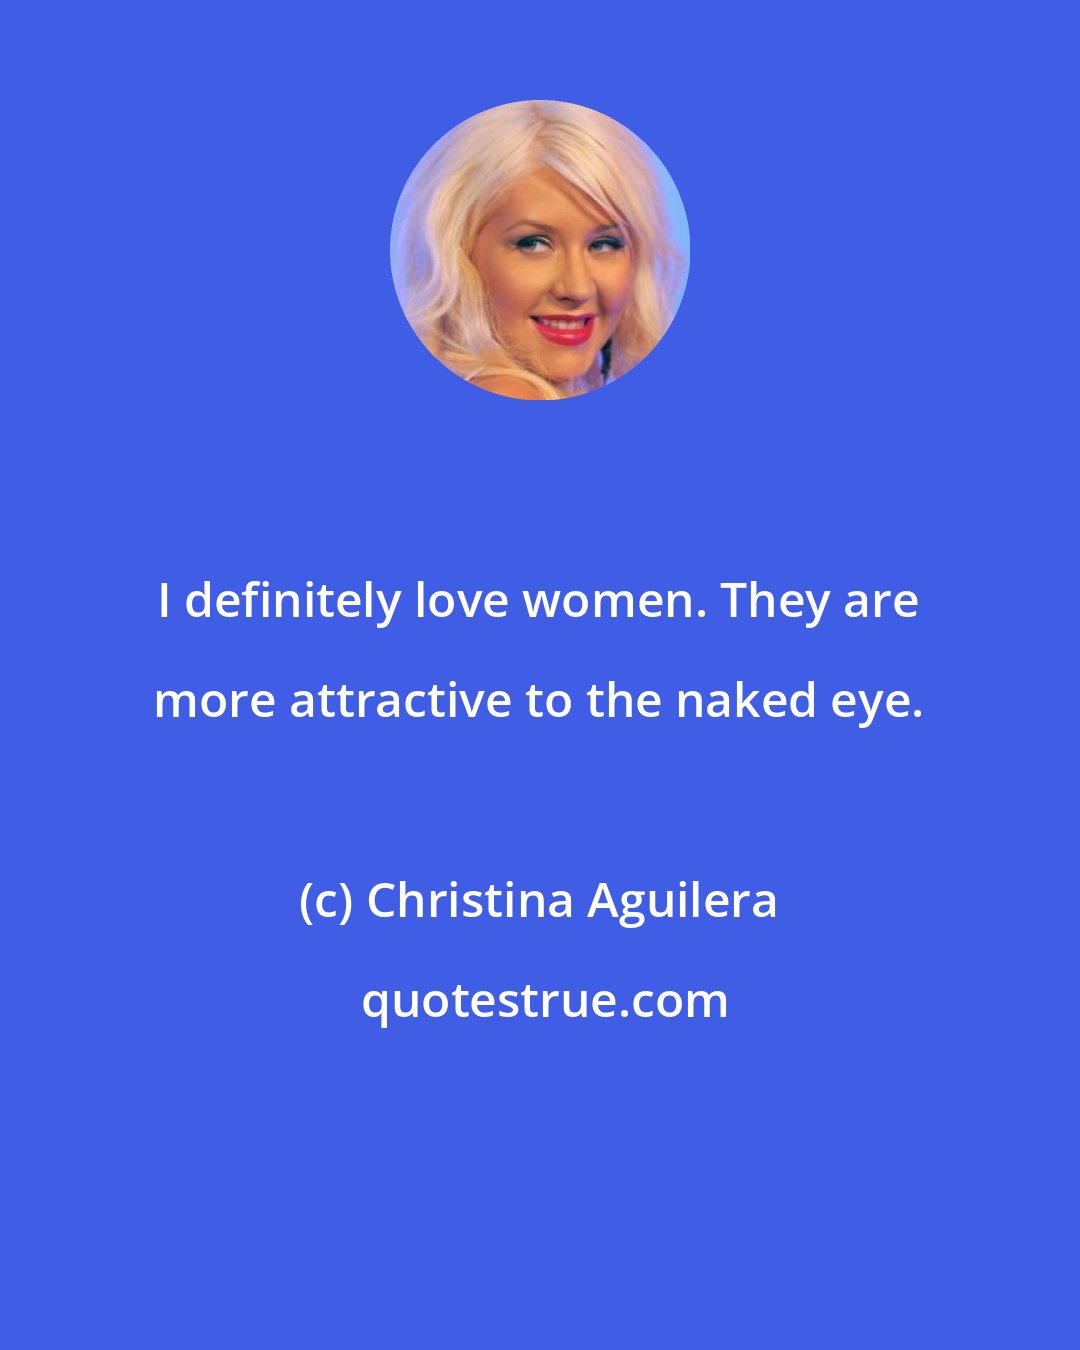 Christina Aguilera: I definitely love women. They are more attractive to the naked eye.